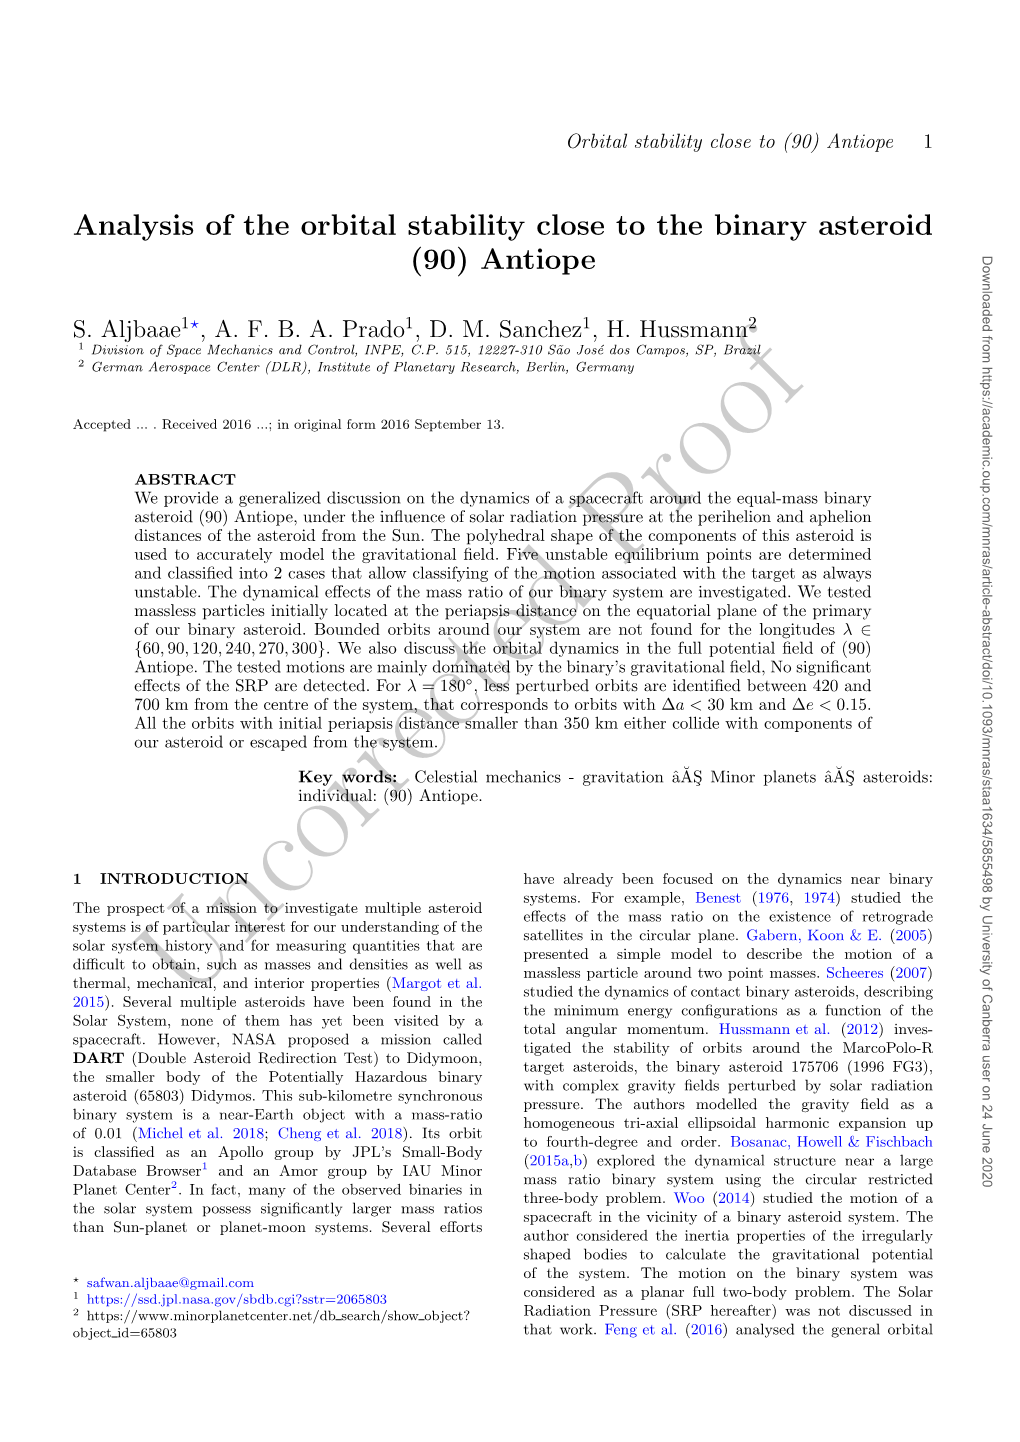 Analysis of the Orbital Stability Close to the Binary Asteroid (90) Antiope